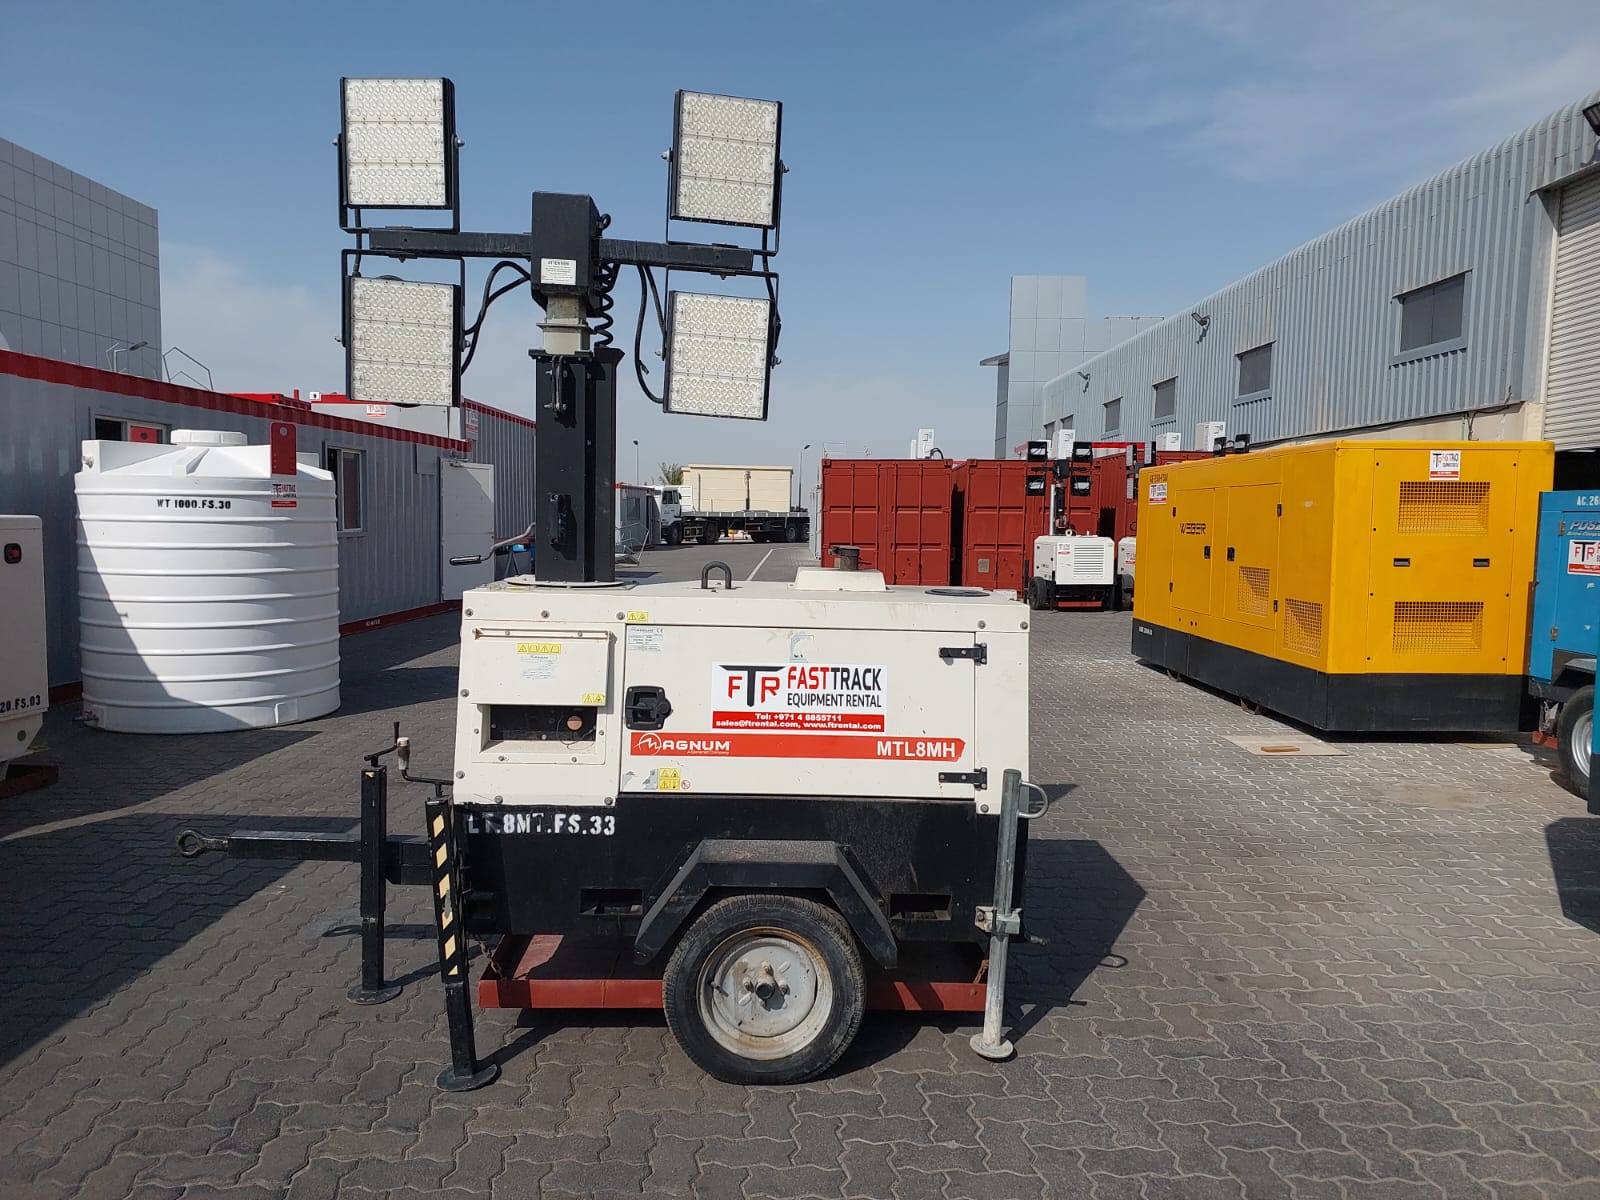 Fast track equipment rental company's portable light tower for rent in Dubai and Abu Dhabi